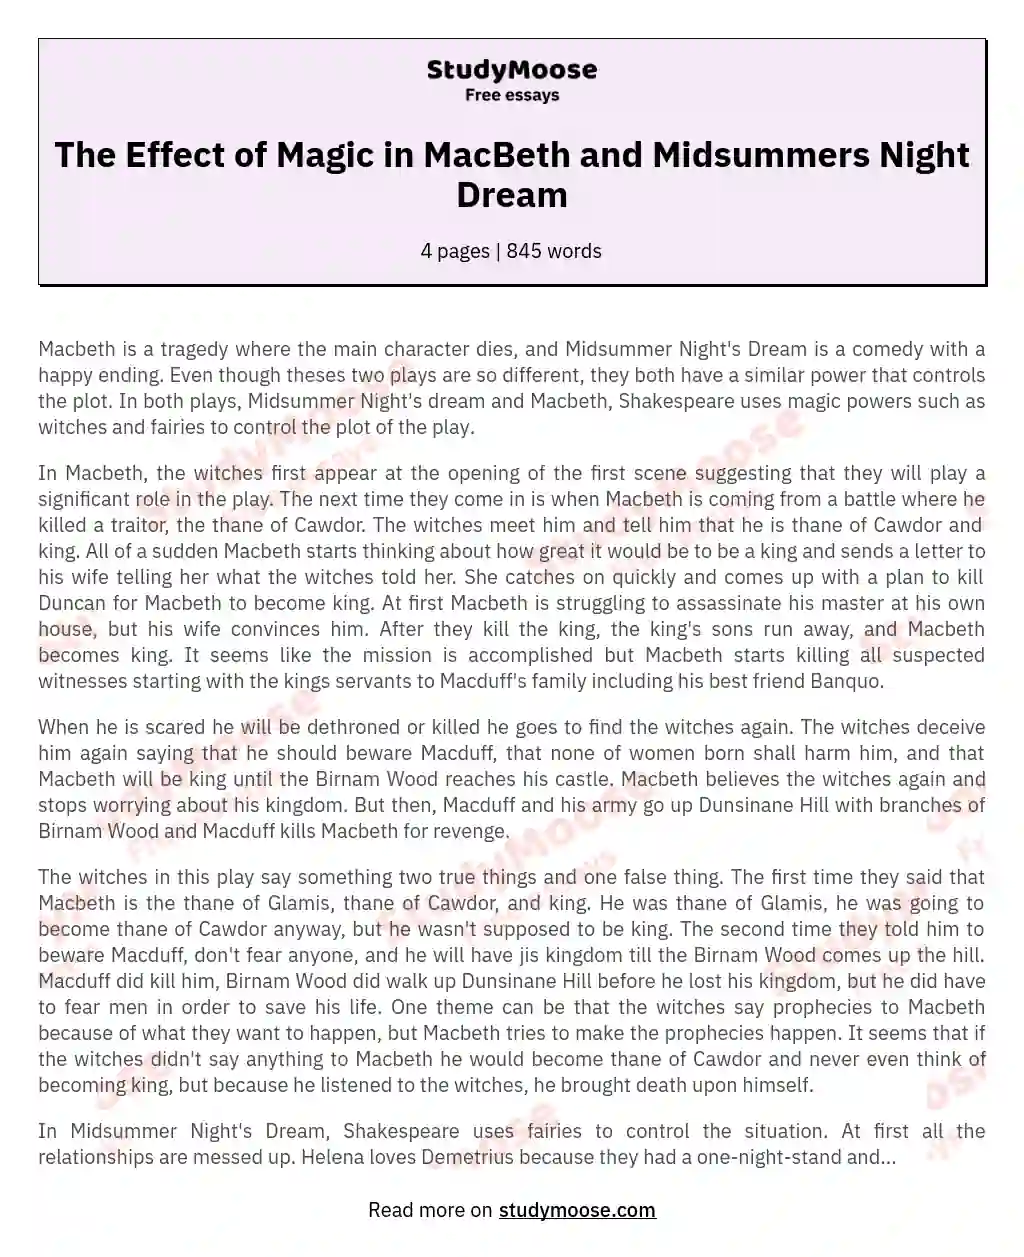 The Effect of Magic in MacBeth and Midsummers Night Dream essay